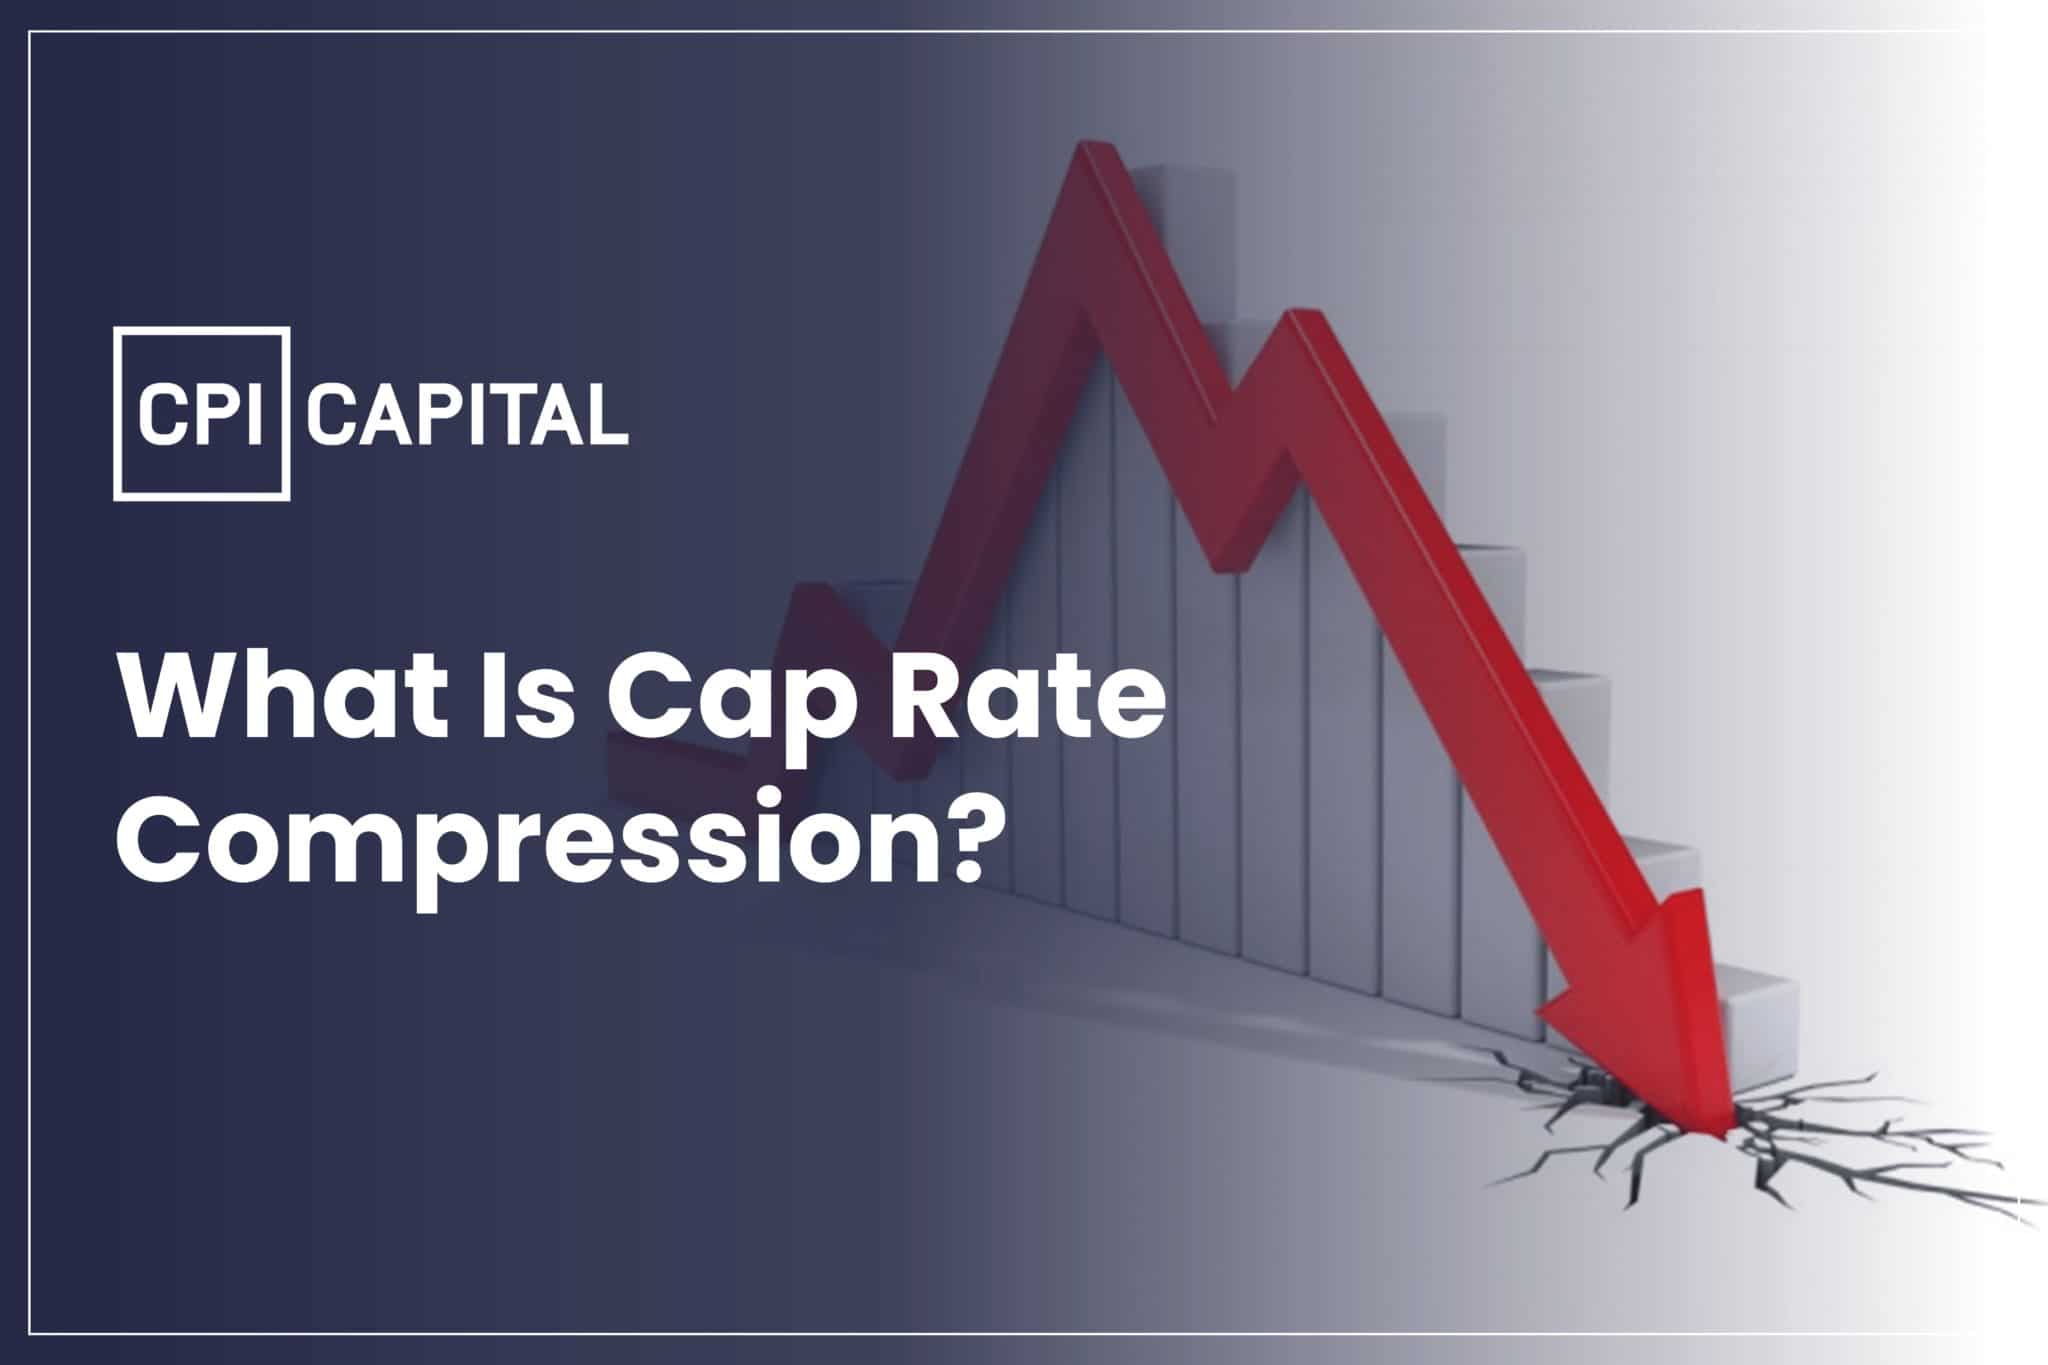 Konsekvenser papir avis What Is Cap Rate Compression? Understanding the implications - CPI